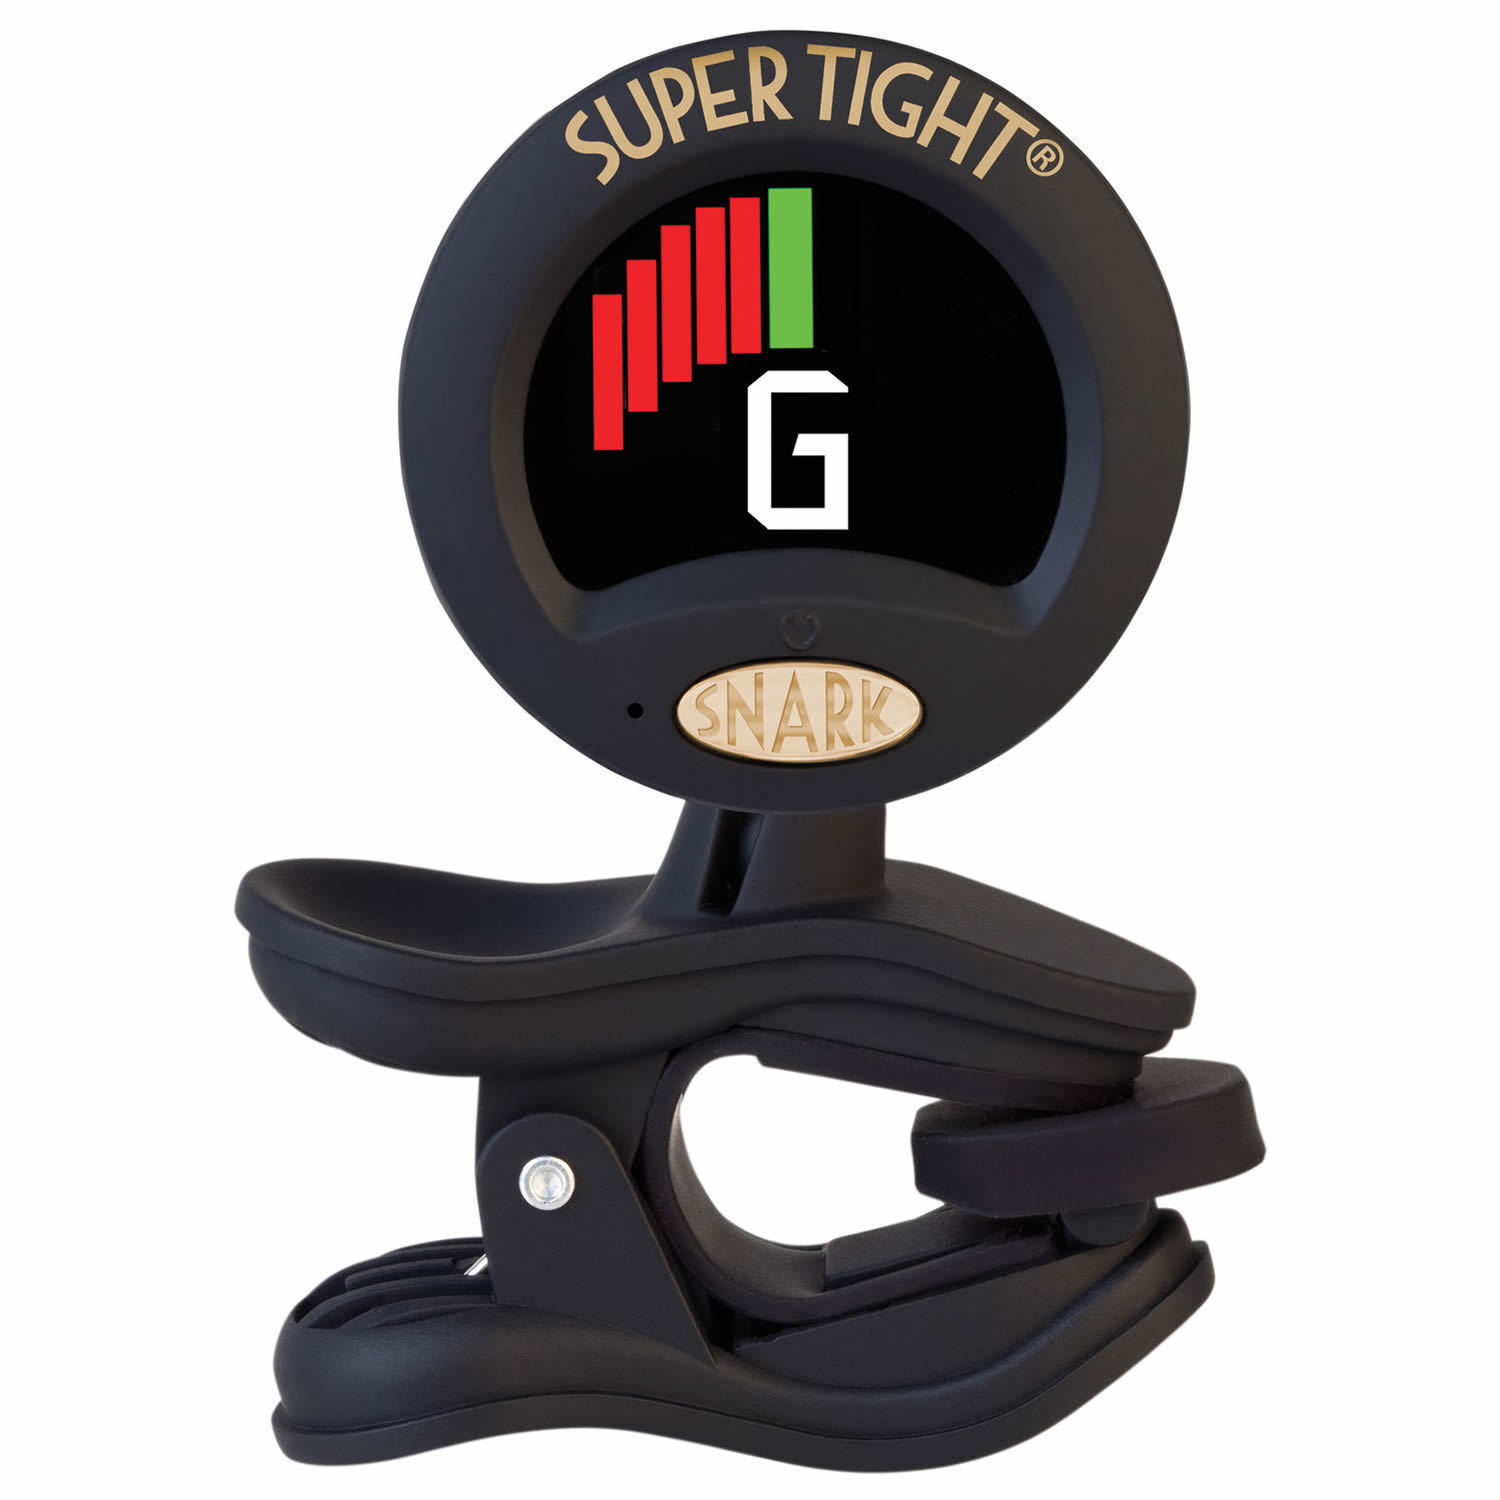 NEW SNARK ST-8 SUPER TIGHT CLIP-ON TUNER FOR ALL INSTRUMENTS WITH FREE BATTERY Snark ST-8